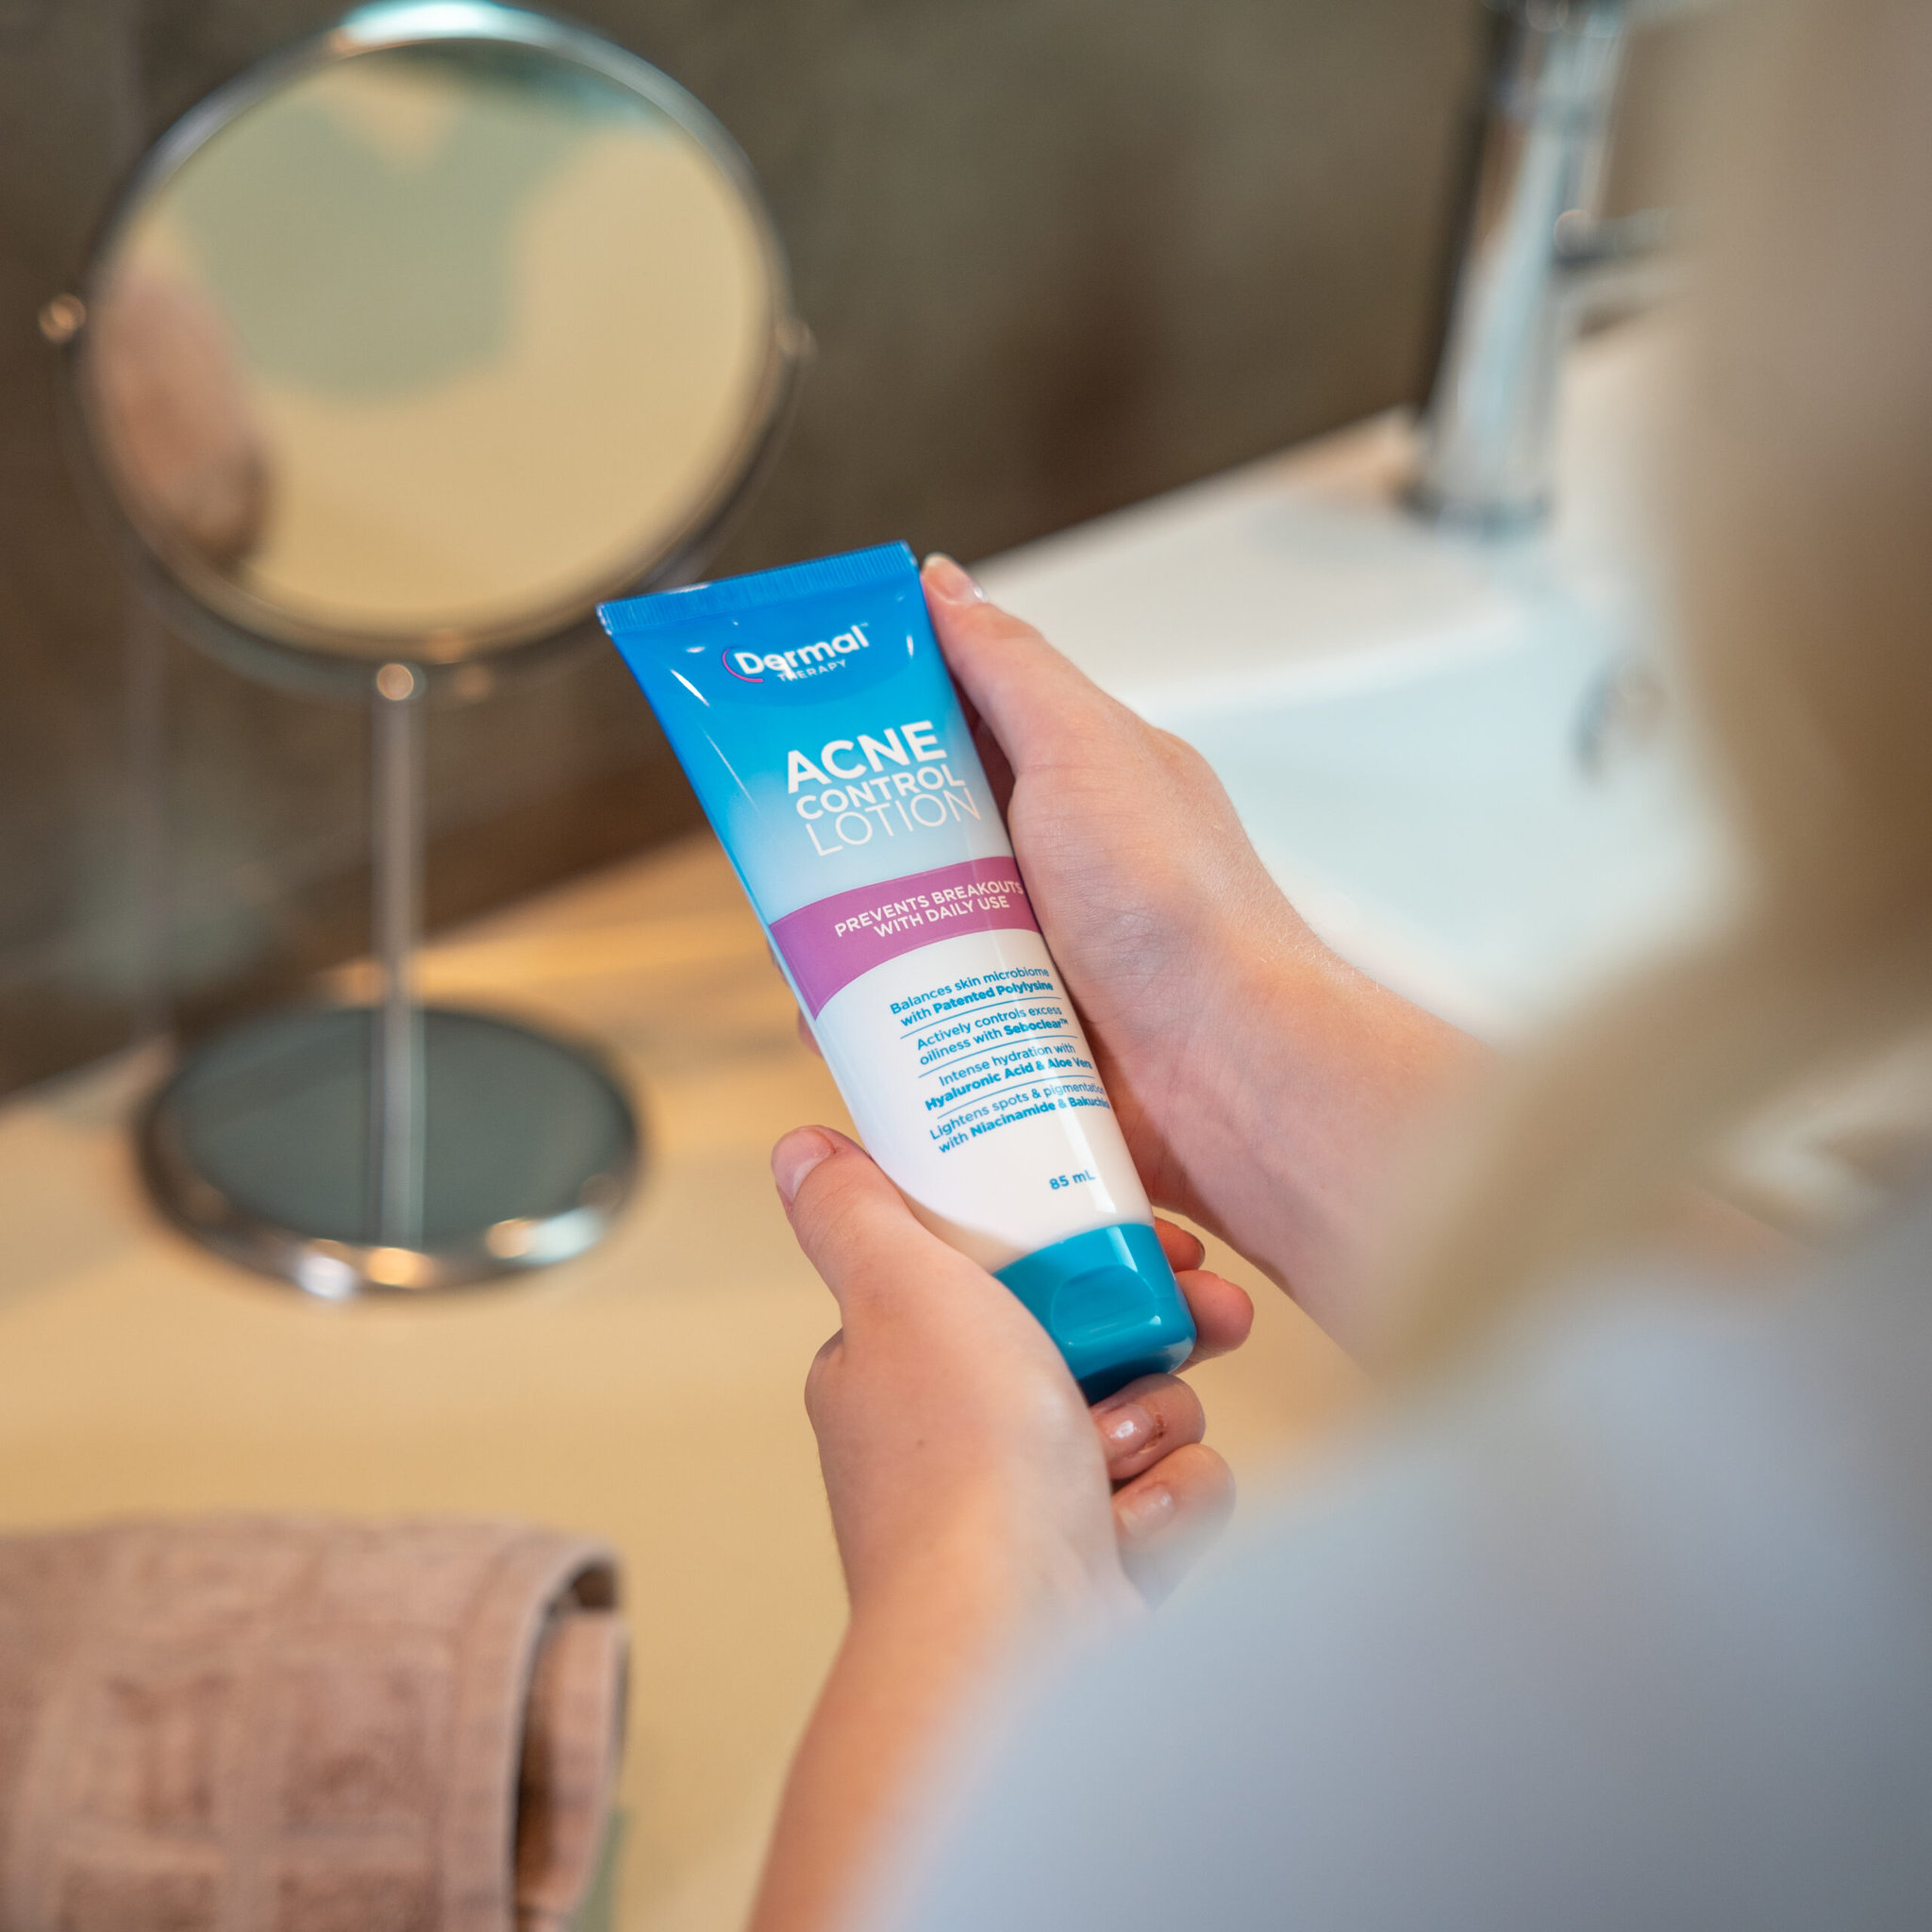 A woman holding a Dermal Therapy Acne Control Lotion tube in the bathroom, with a shaving mirror in the background.